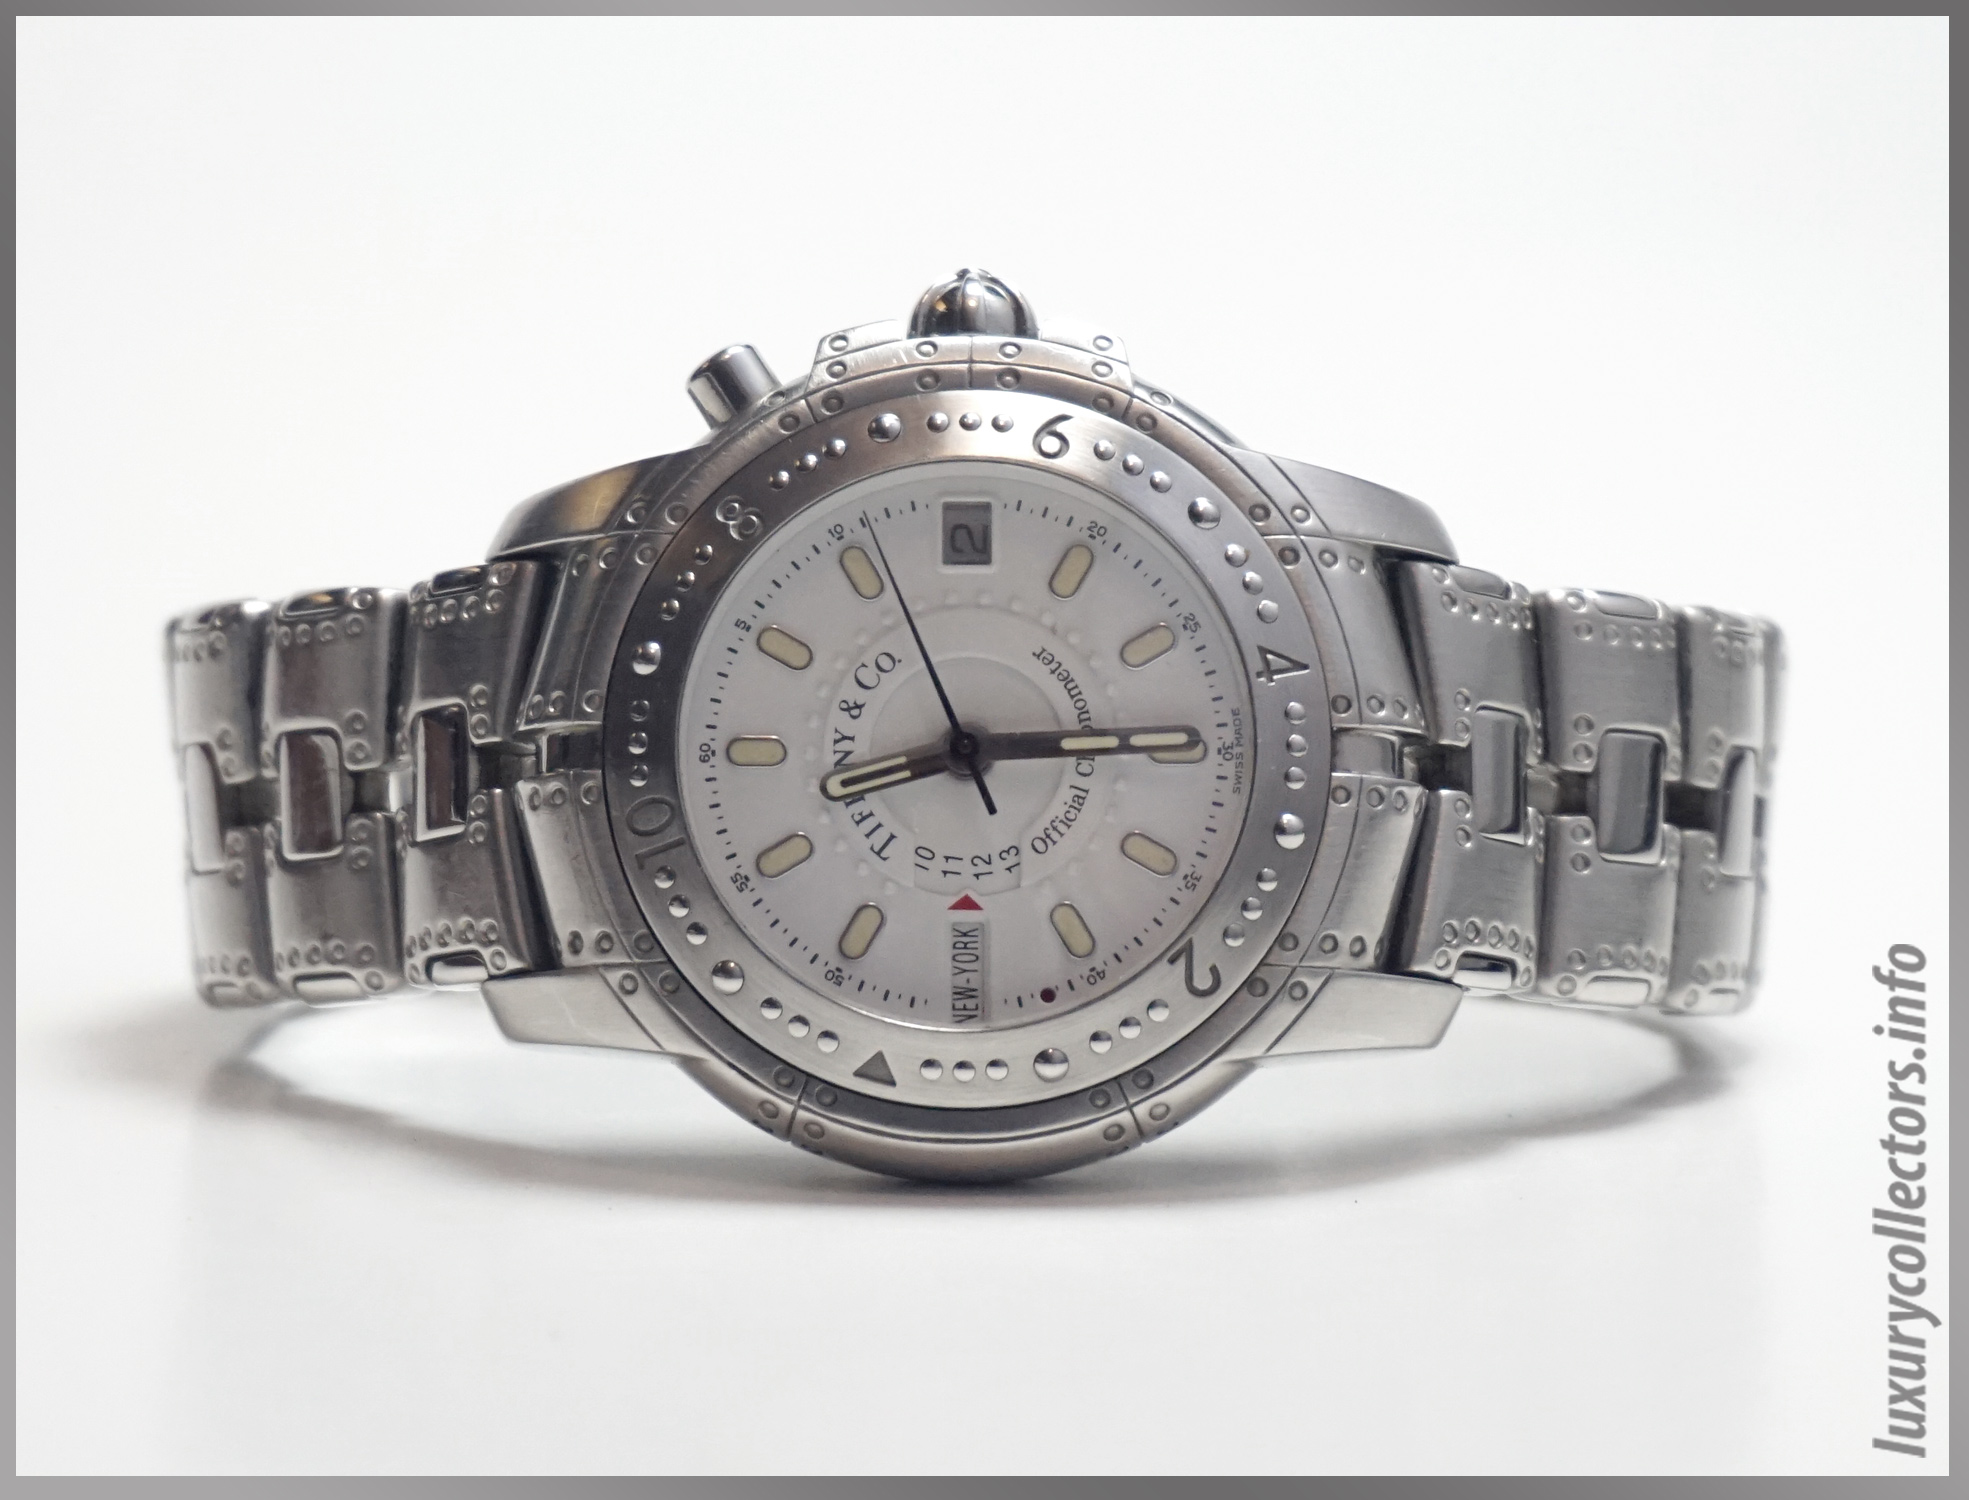 Tiffany & Co. Streamerica World Time Automatic Chronometer Wristwatch in all stainless steel and white face. 